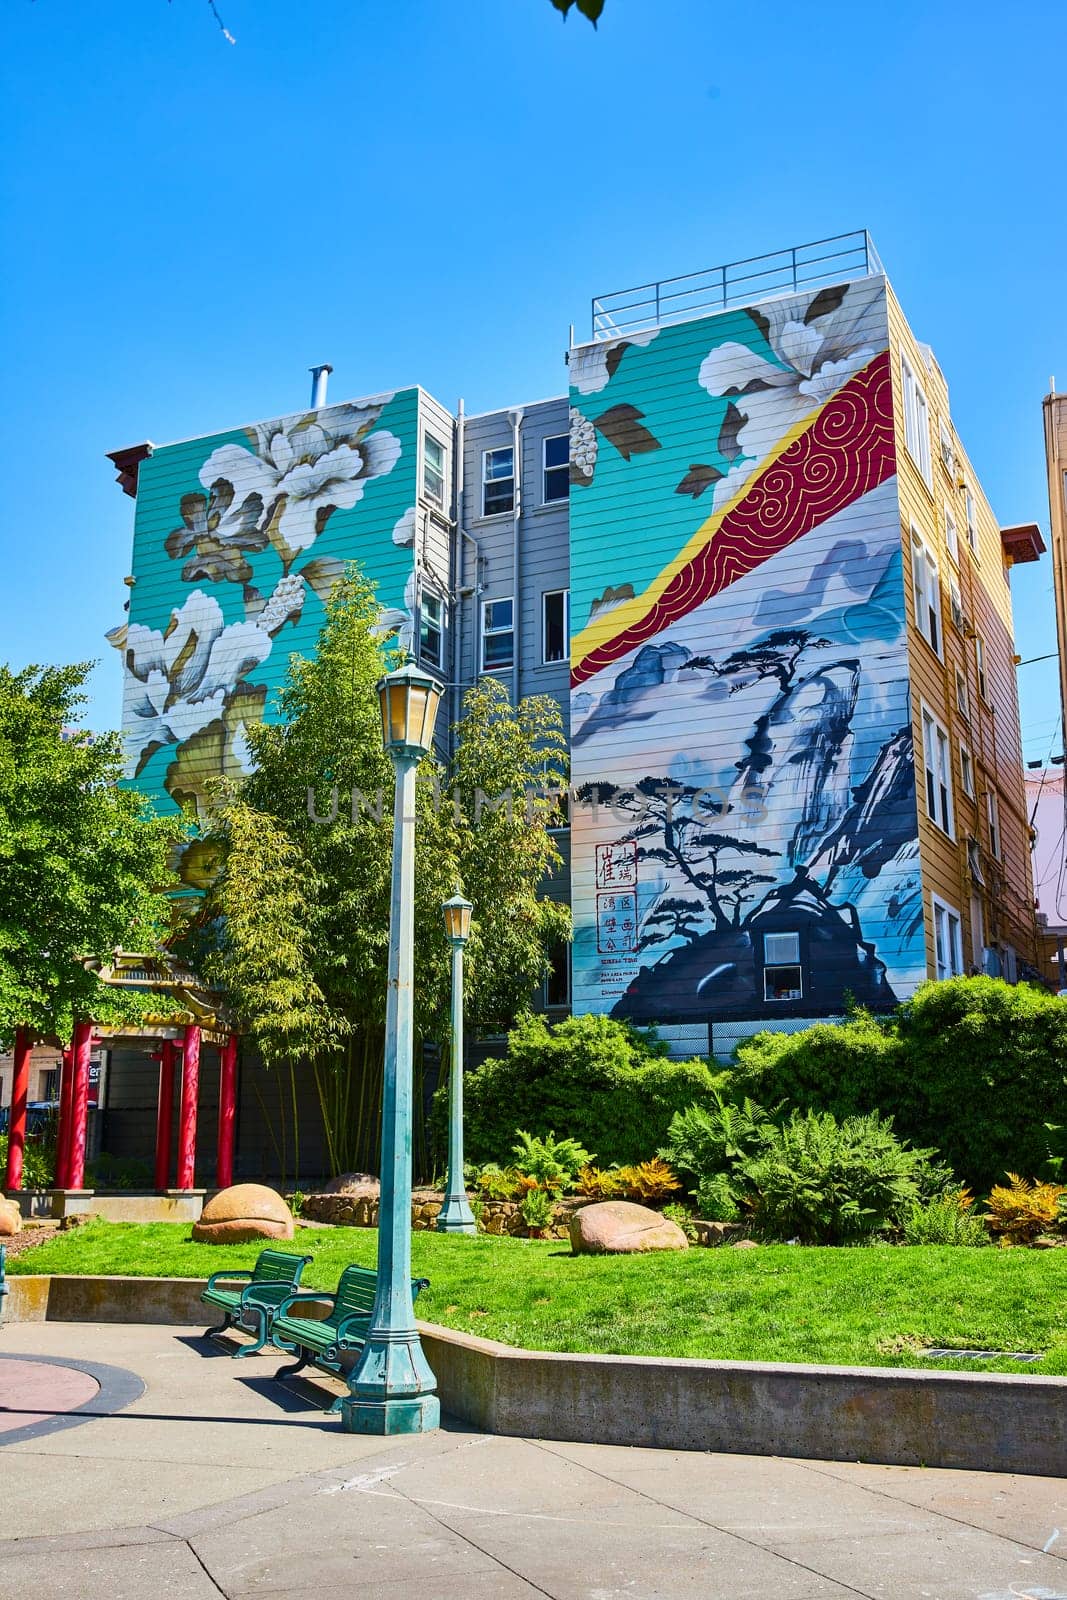 Image of Peaceful and zen art mural on buildings overlooking sunny park with green benches